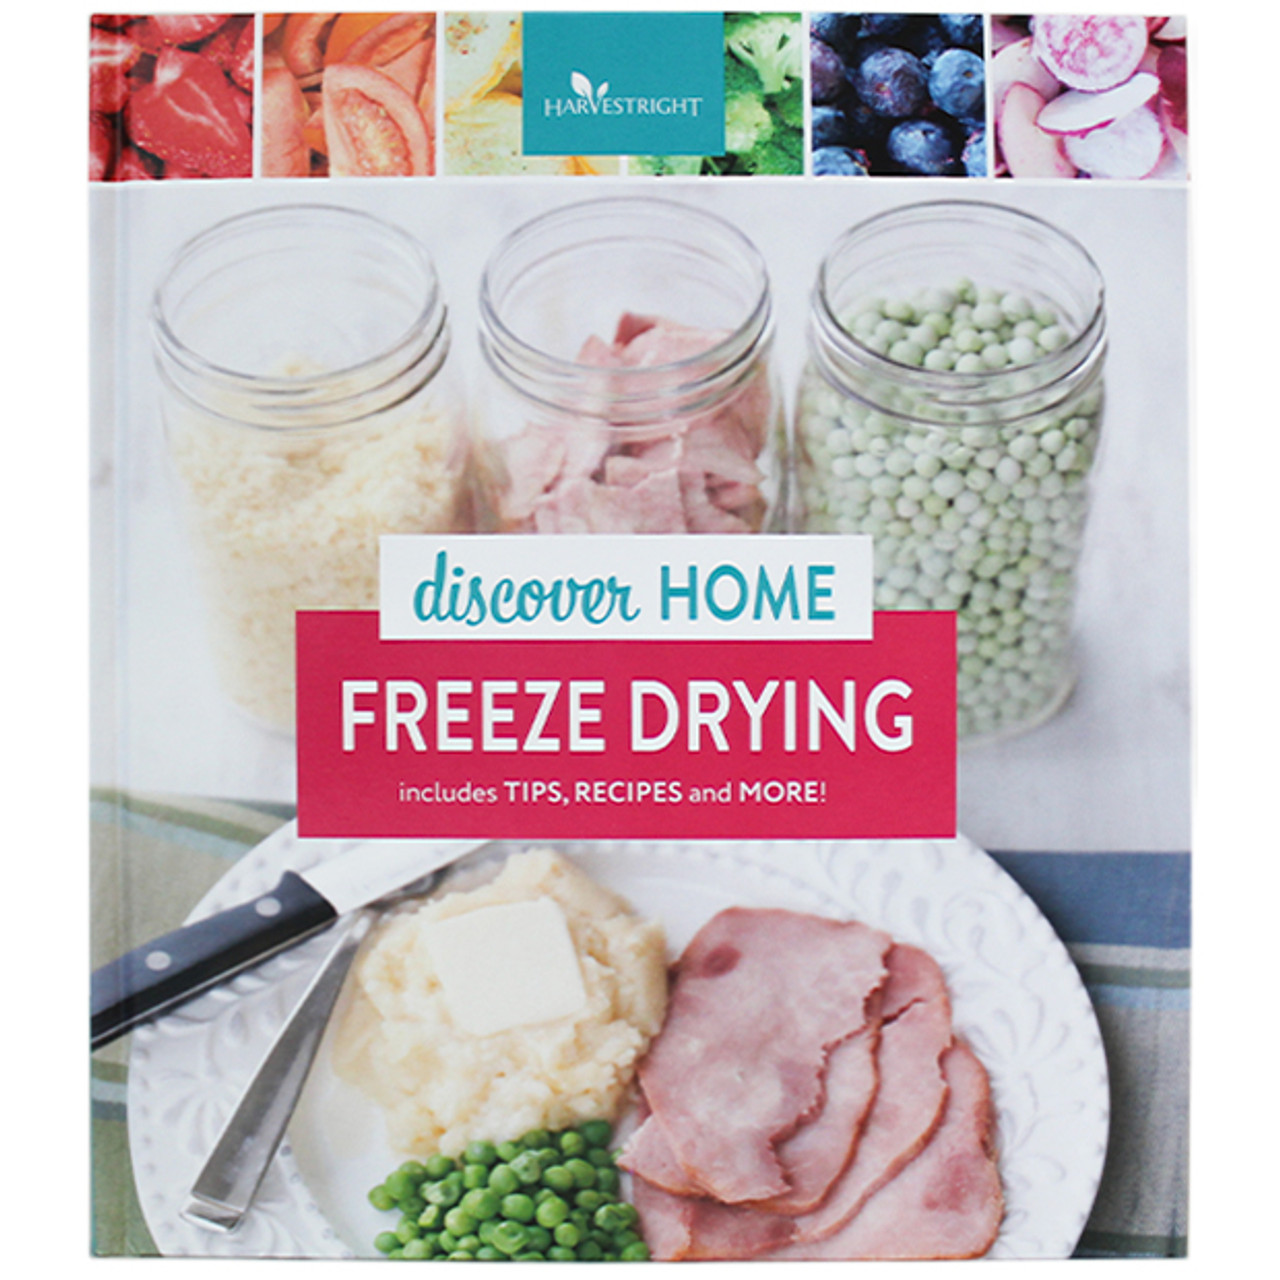 Freeze Dryer: Home-made freeze dried foods using the Harvest Right